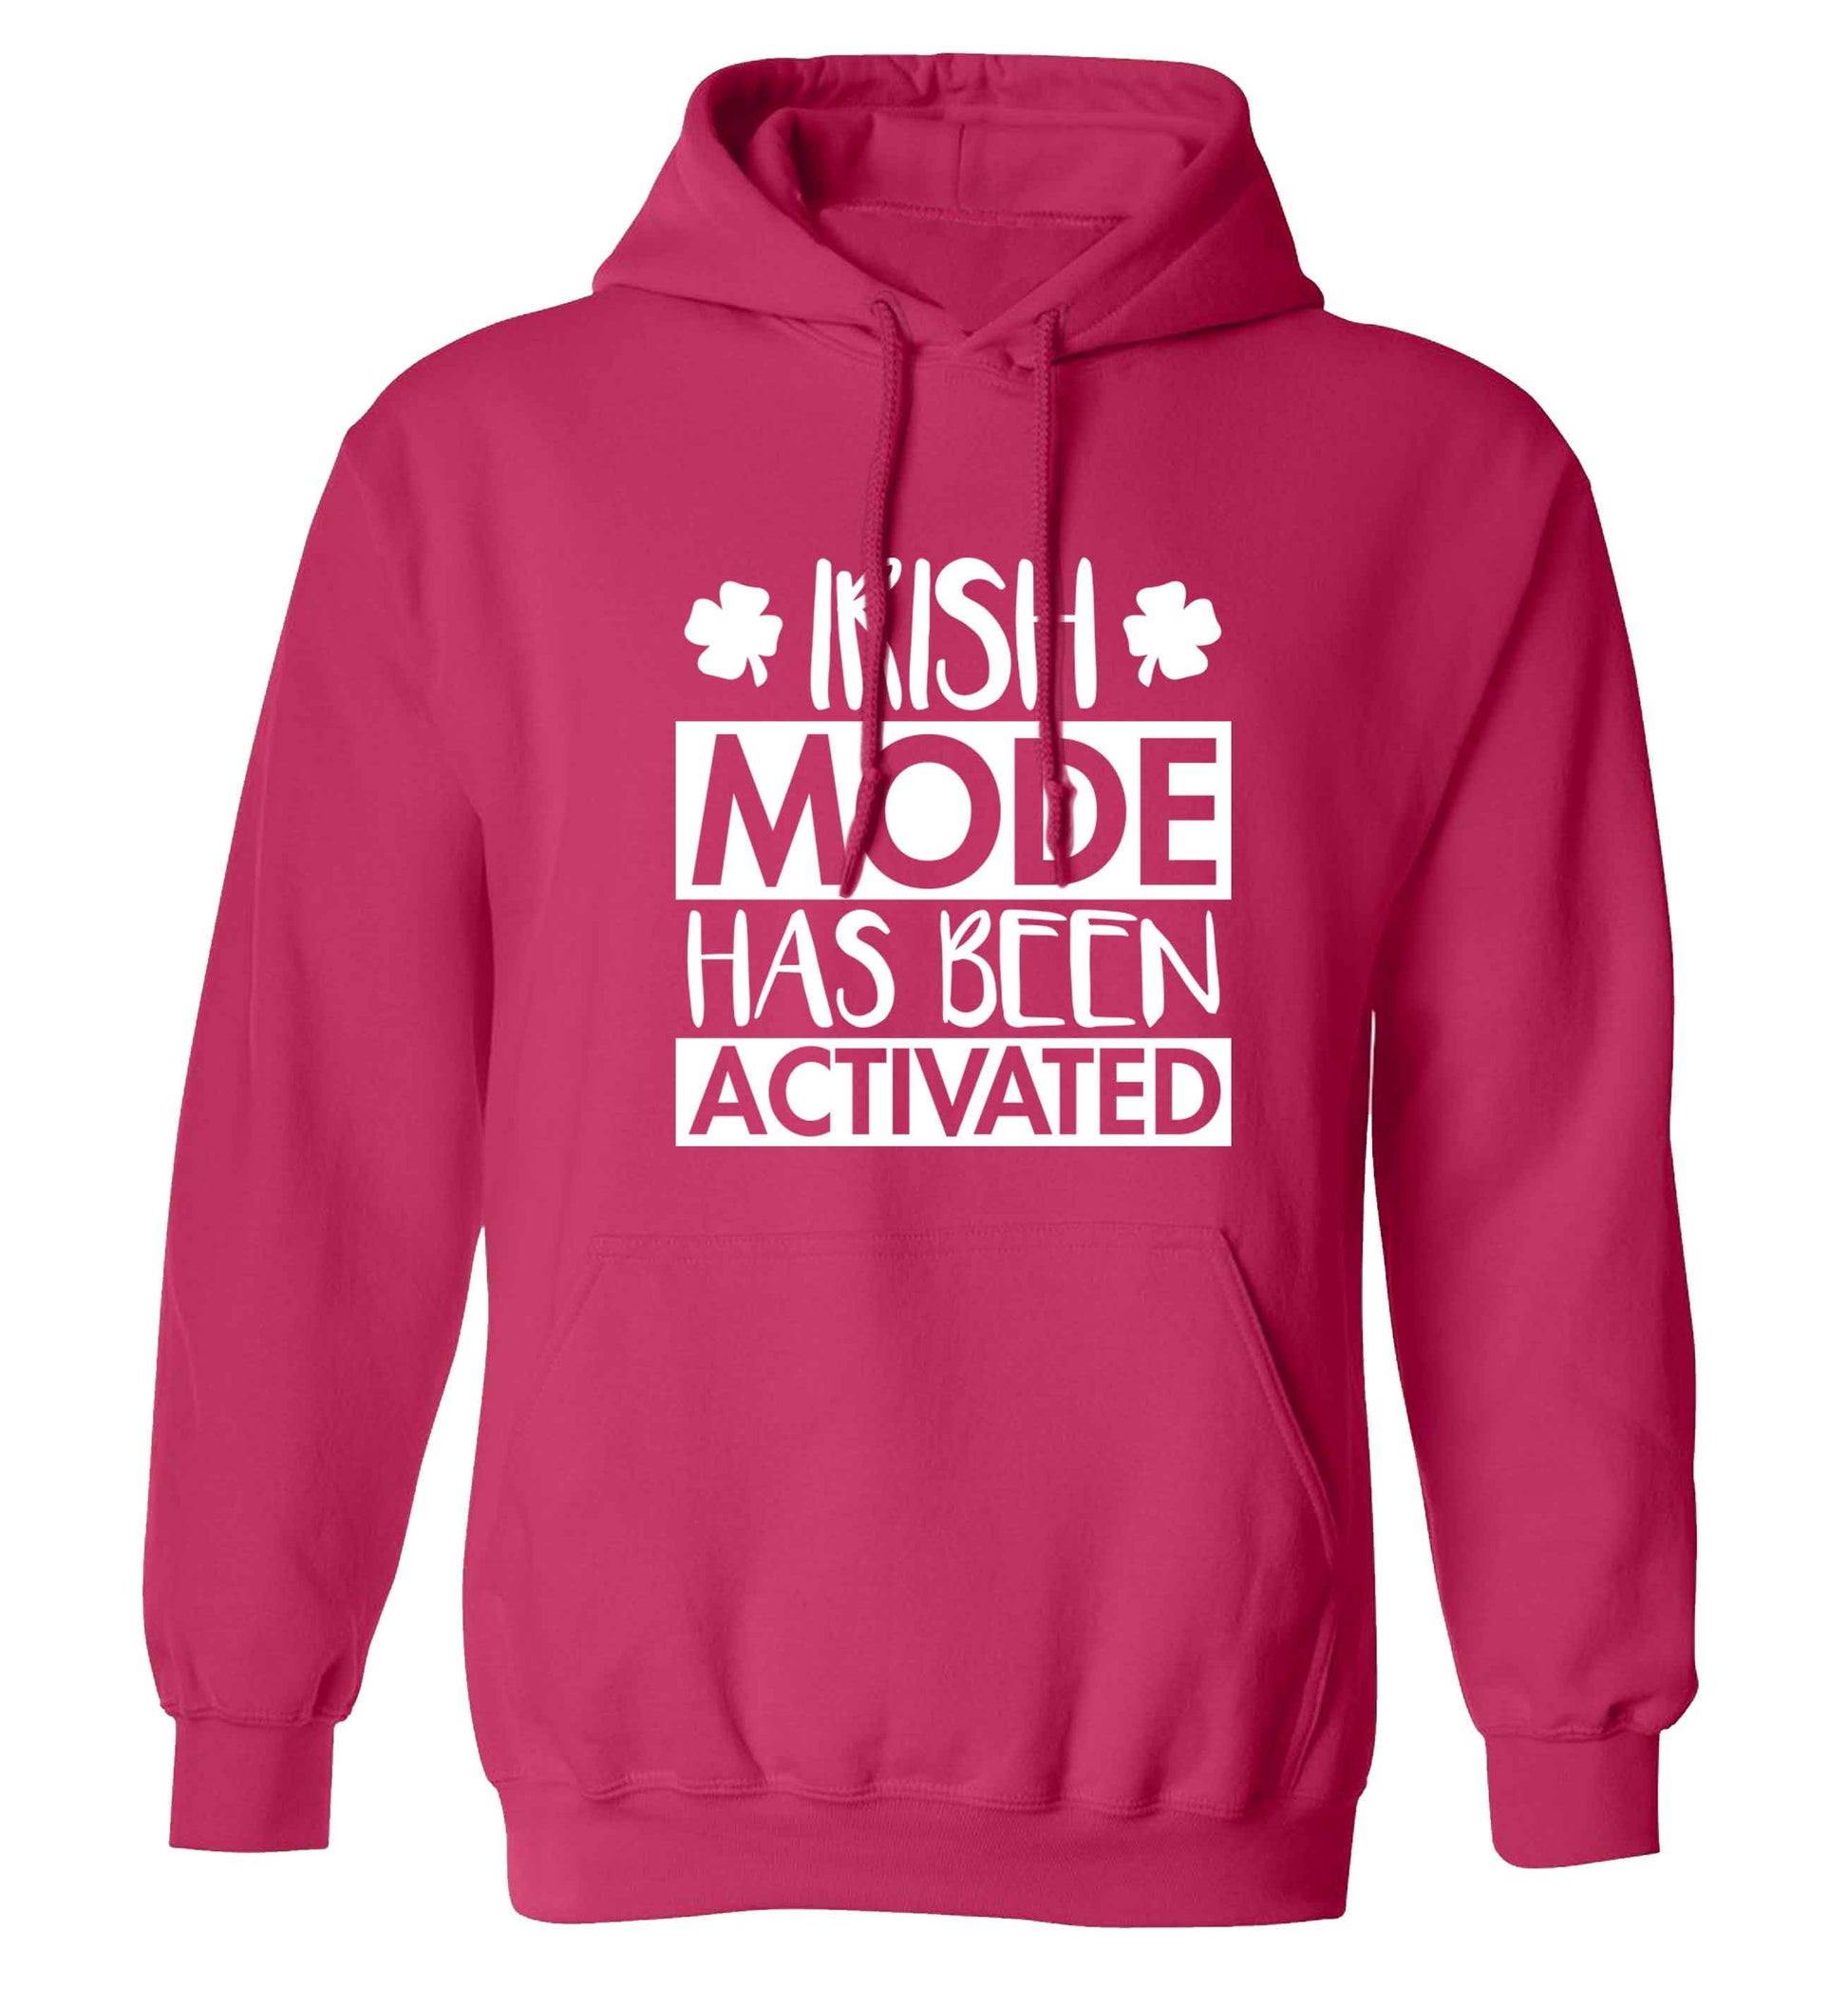 Irish mode has been activated adults unisex pink hoodie 2XL